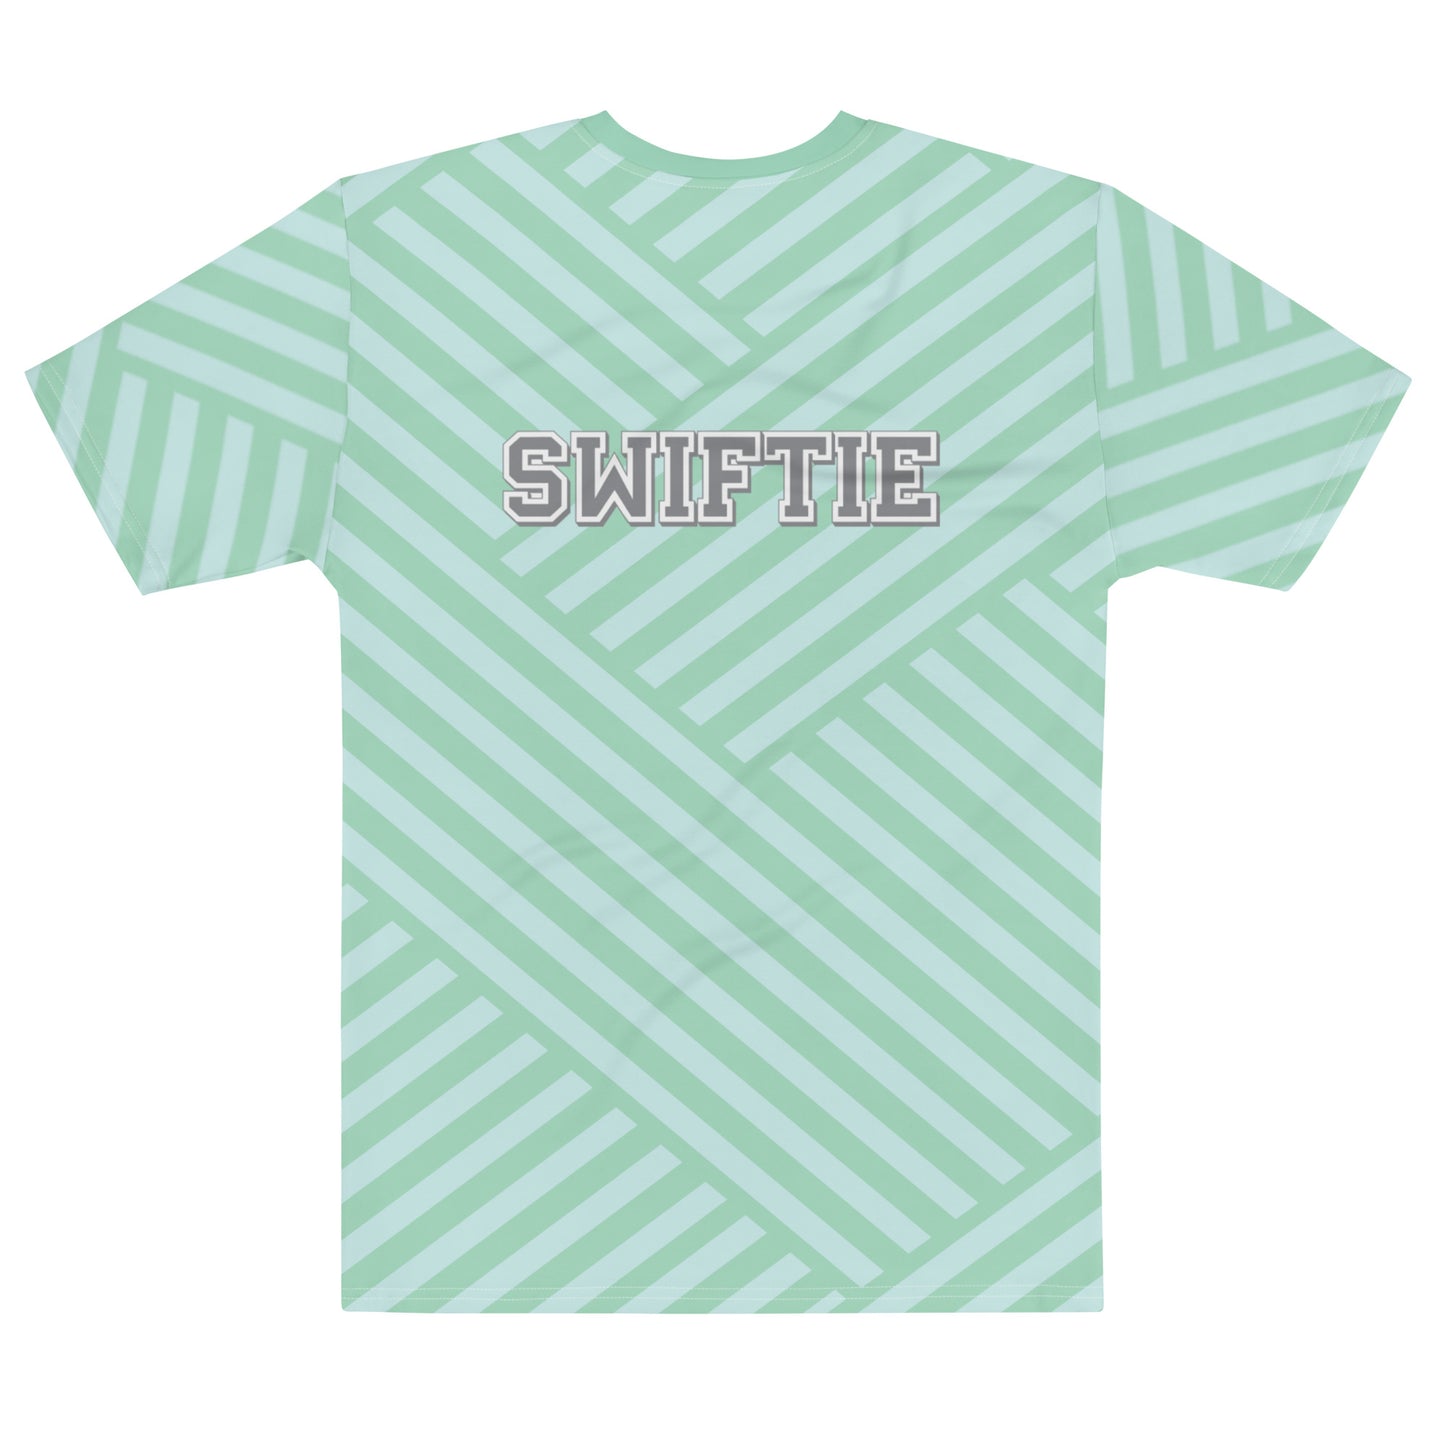 Me! Swiftie - Inspired By Taylor Swift - Sustainably Made Men’s Short Sleeve Tee